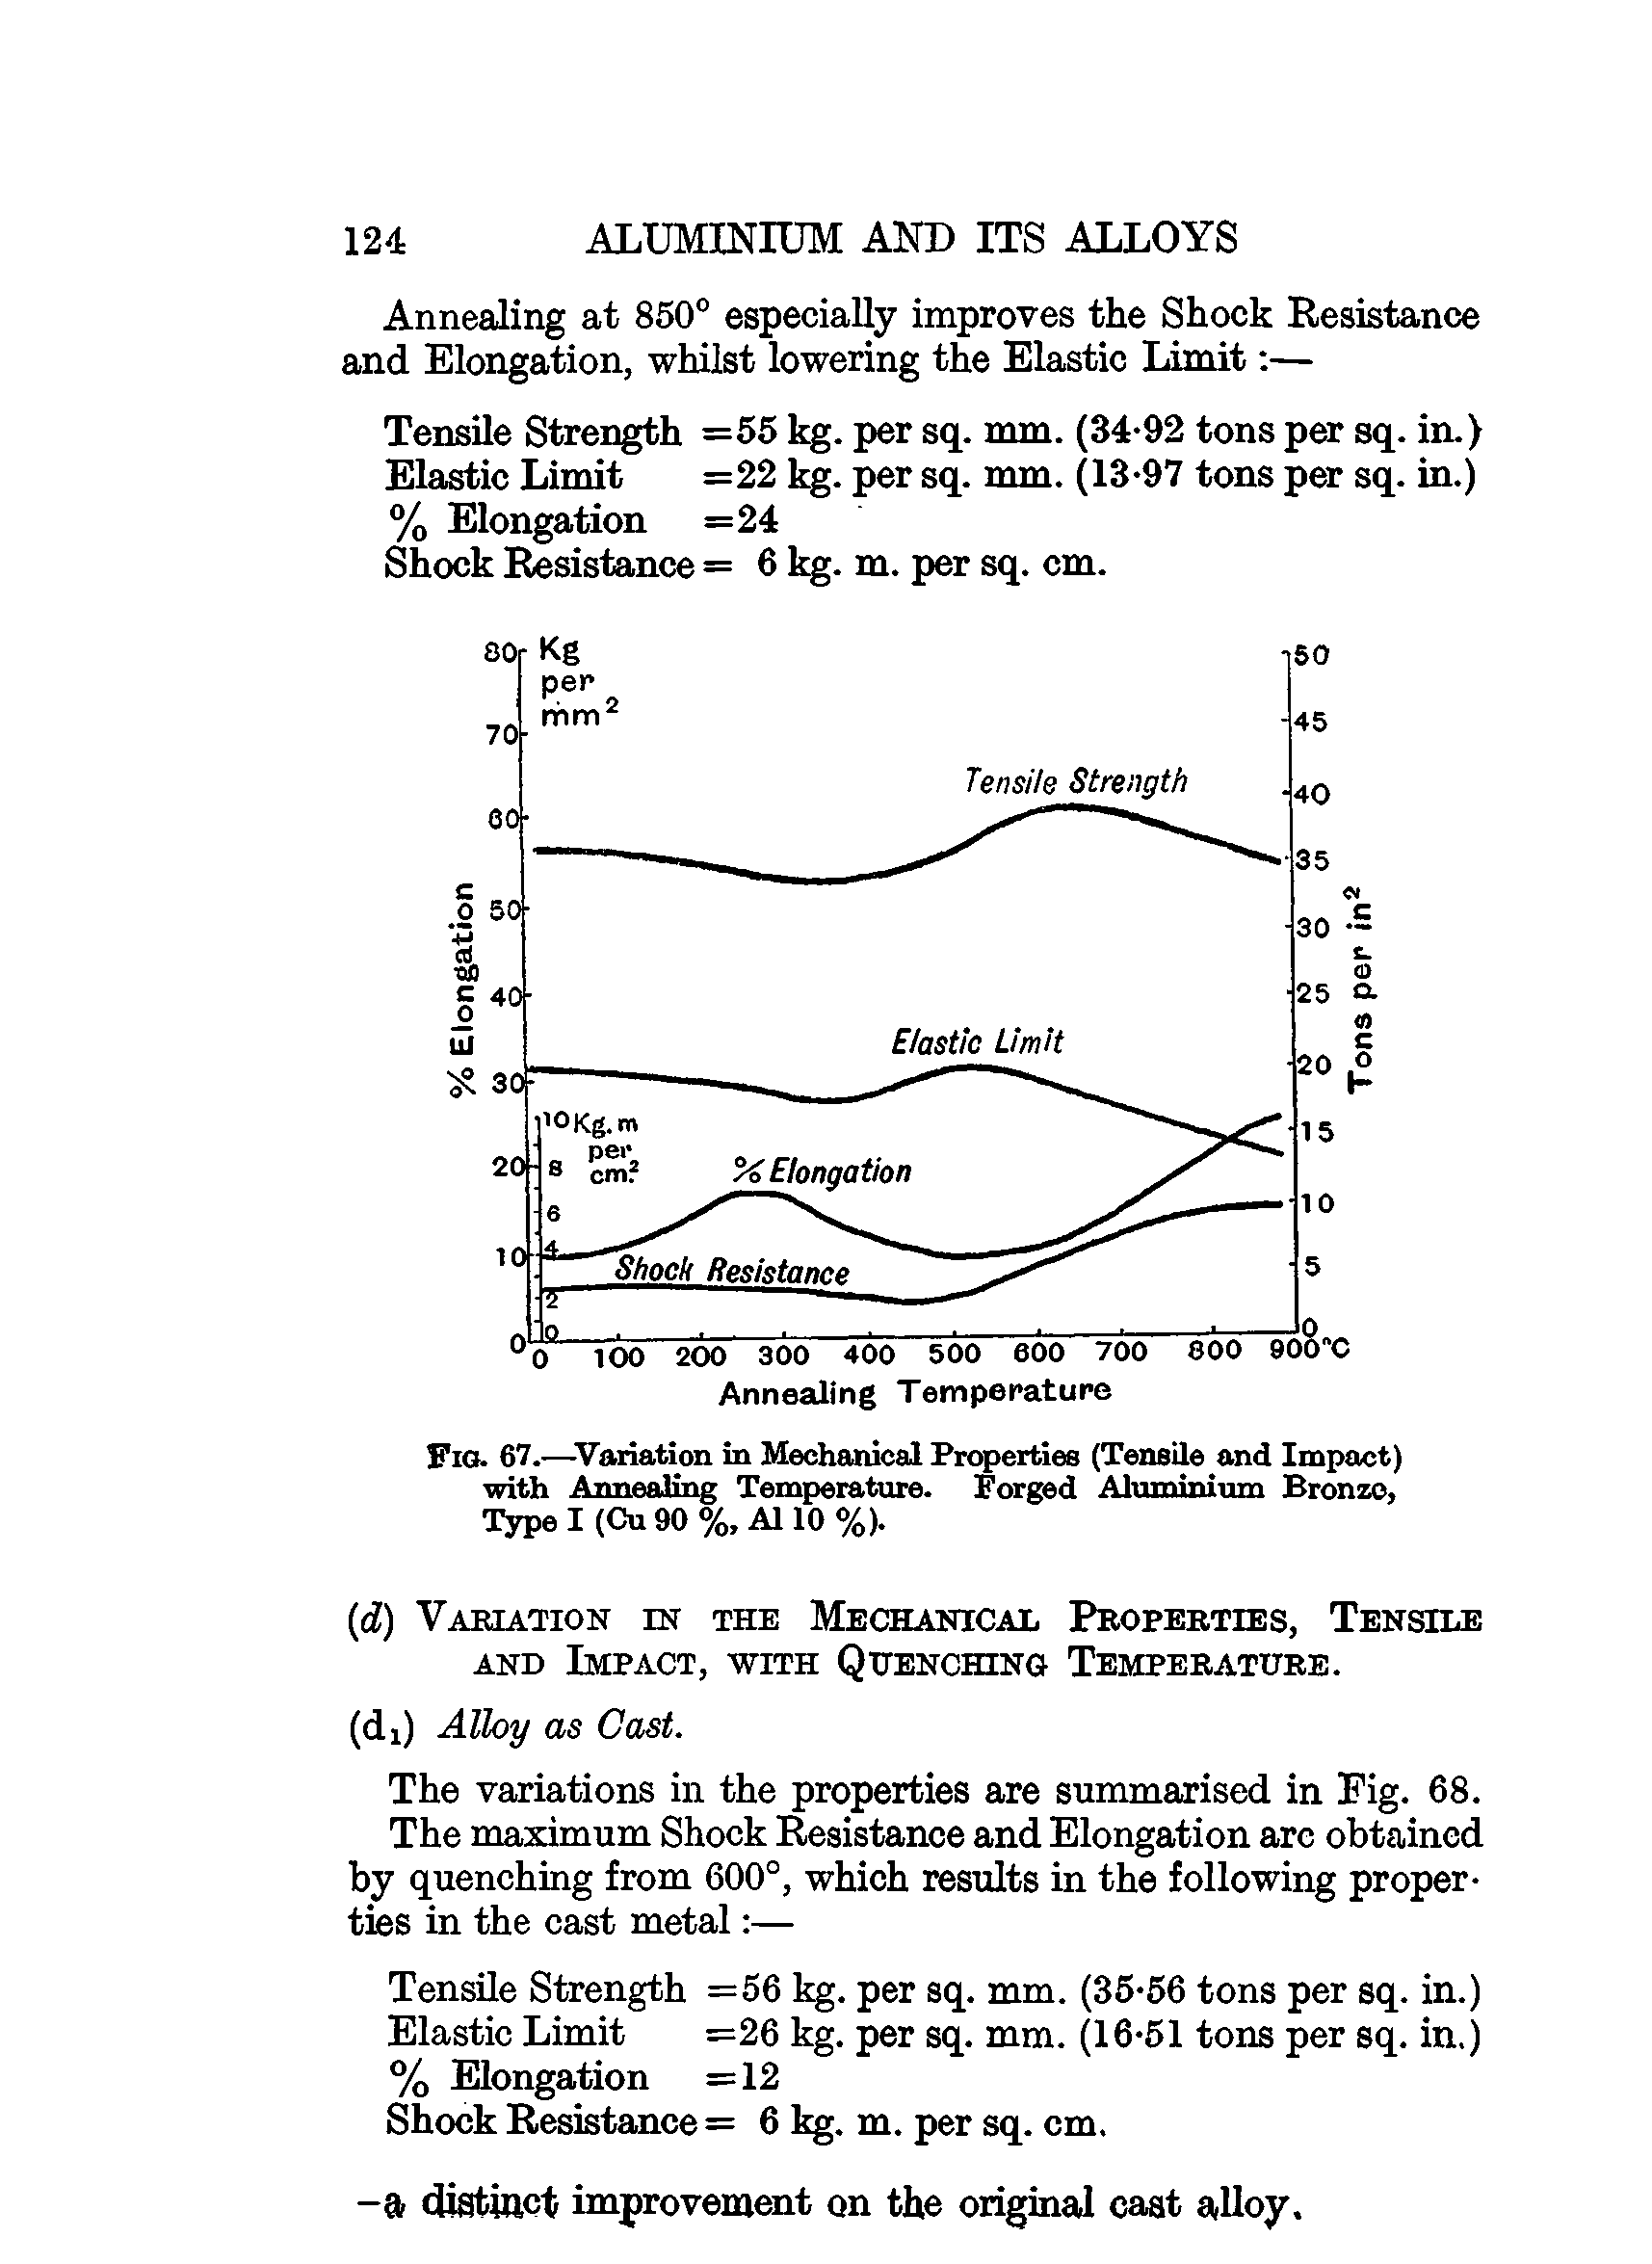 Fig. 67.—Variation in Mechanical Properties (Tensile and Impact) with Annealing Temperature. Forged Aluminium Bronze, Type I (Cu 90 %, A110 %).